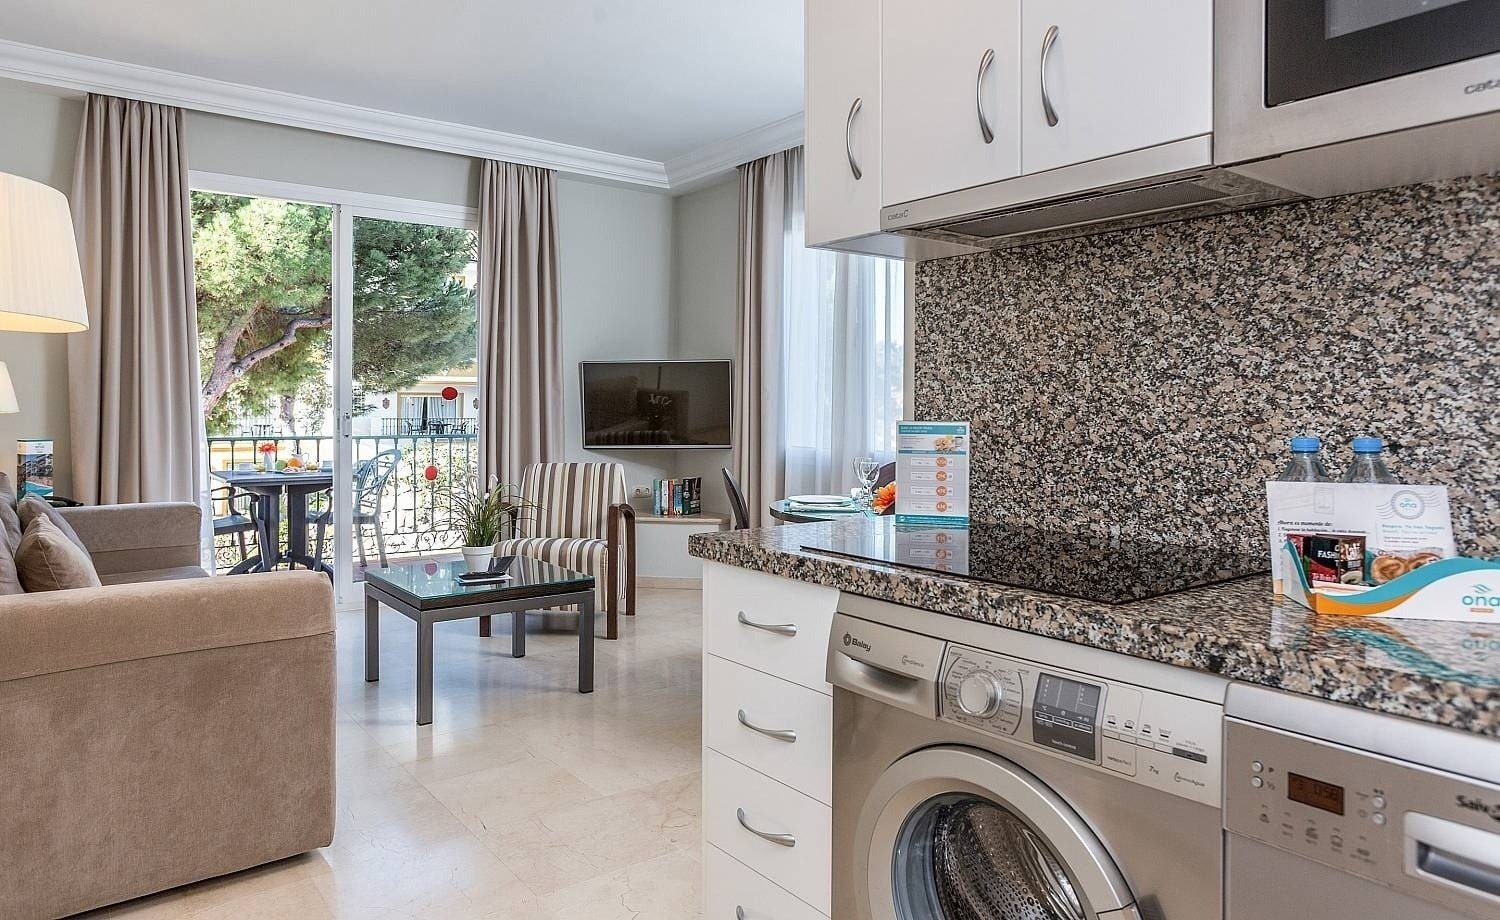 Apartment with kitchen and living room of the Hotel Ona Alanda Club Marbella